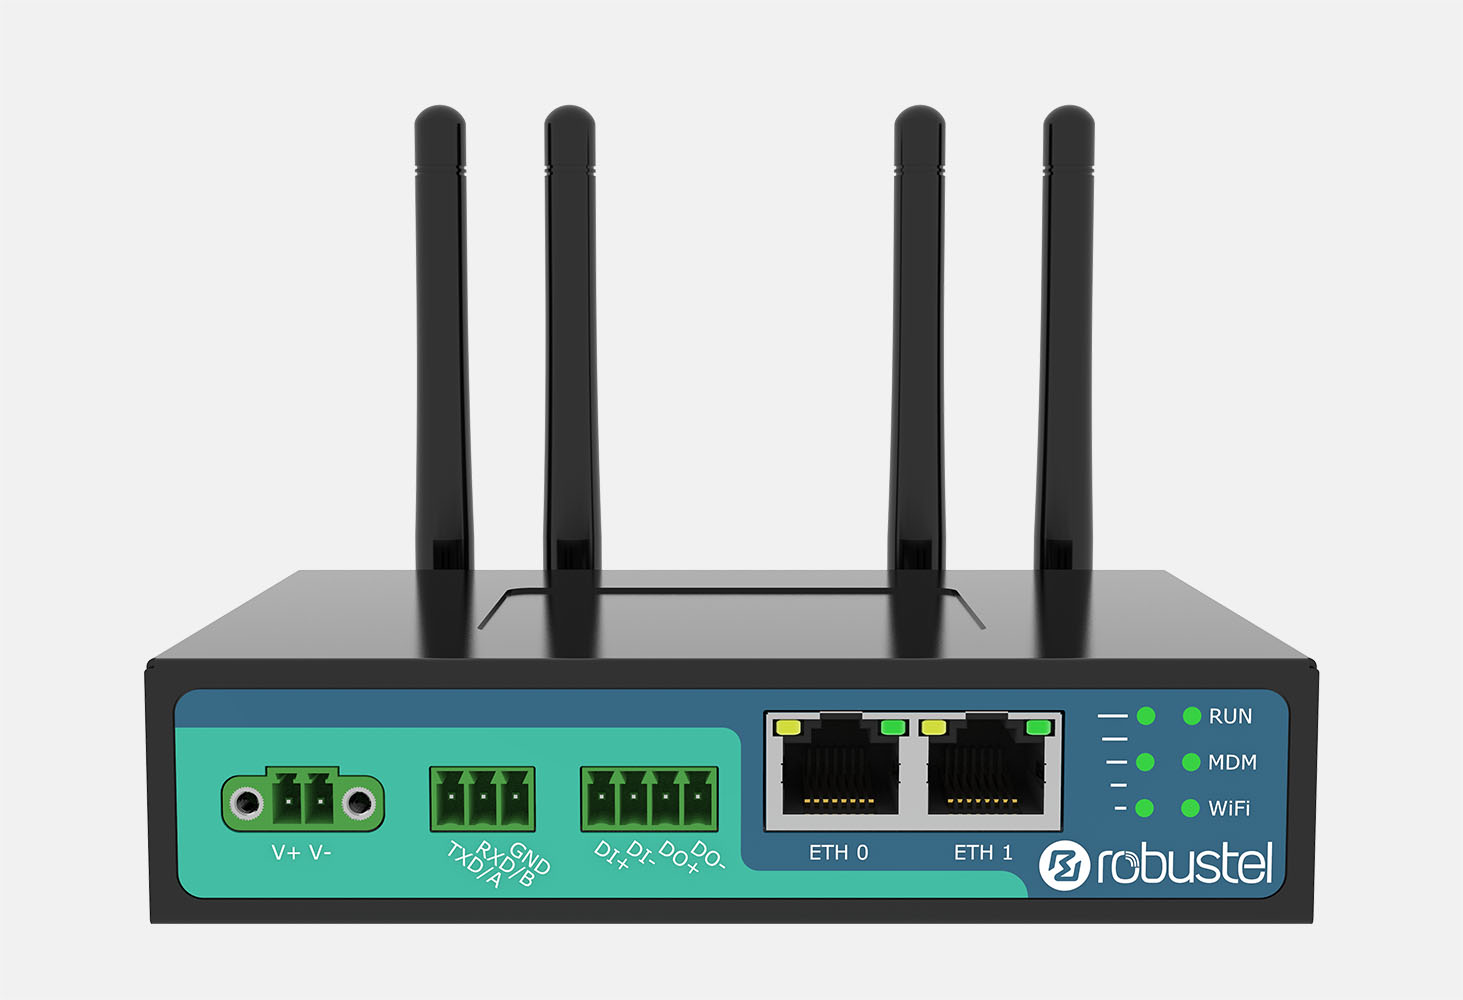 Quectel empowers Robustel's 5G industrial router with next